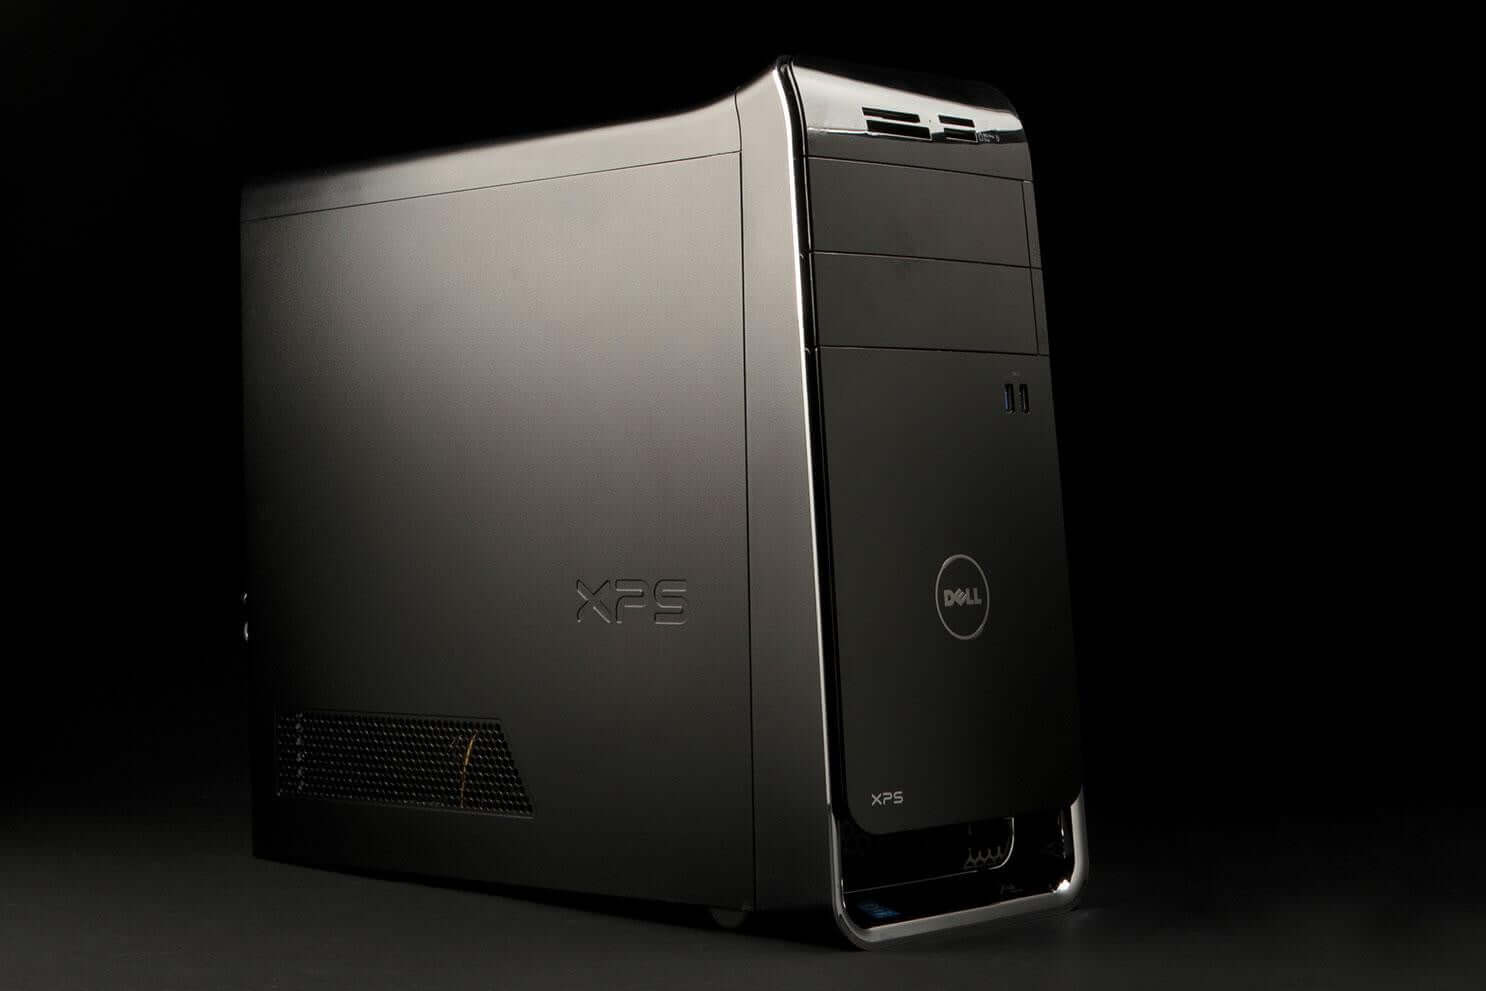 dell xps 8700 gaming pc - www.gklondon.co.uk.